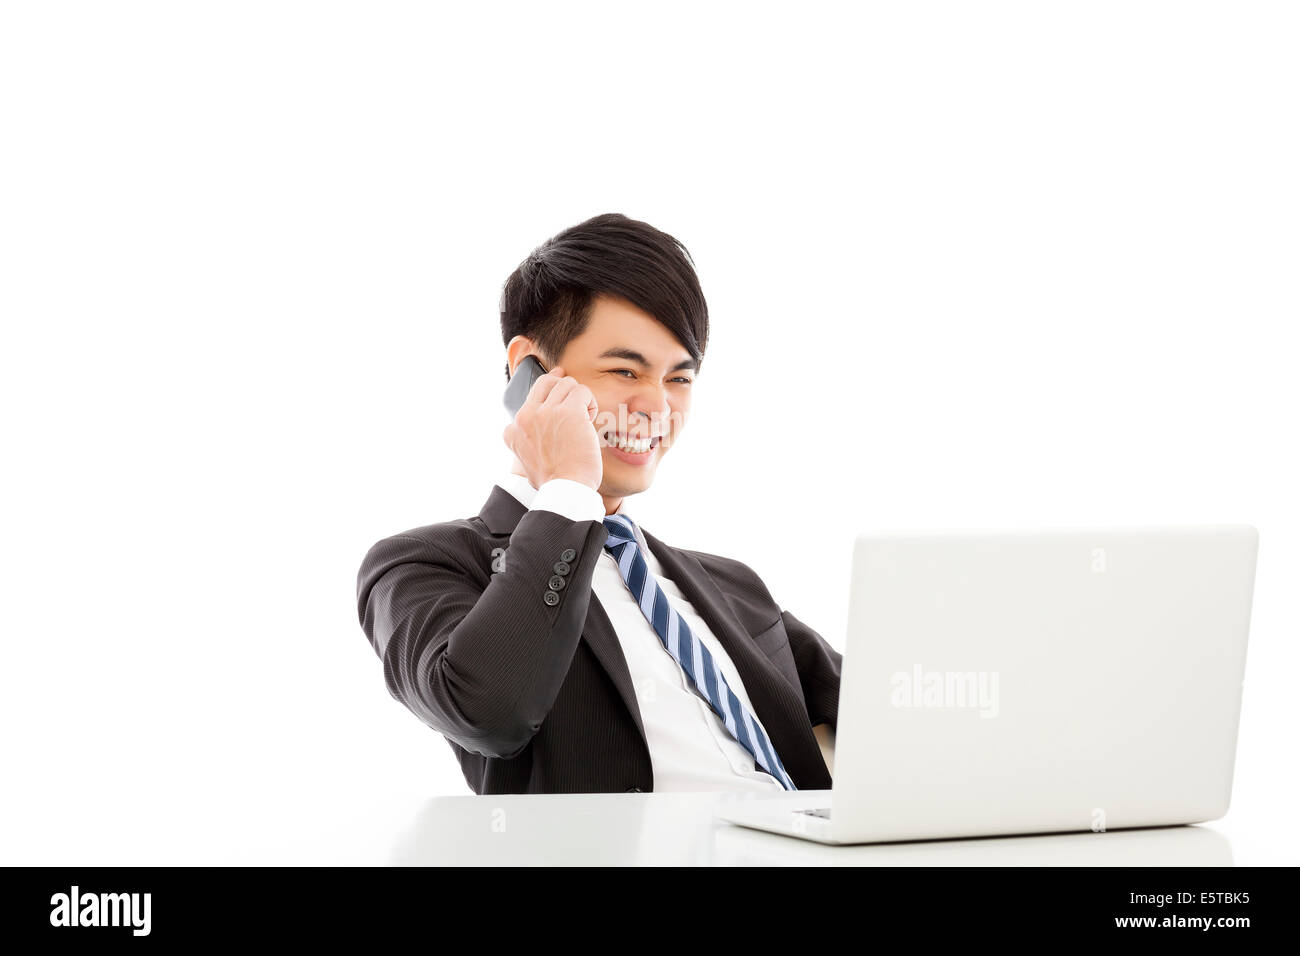 smiling business man talking happily by smart phone Stock Photo